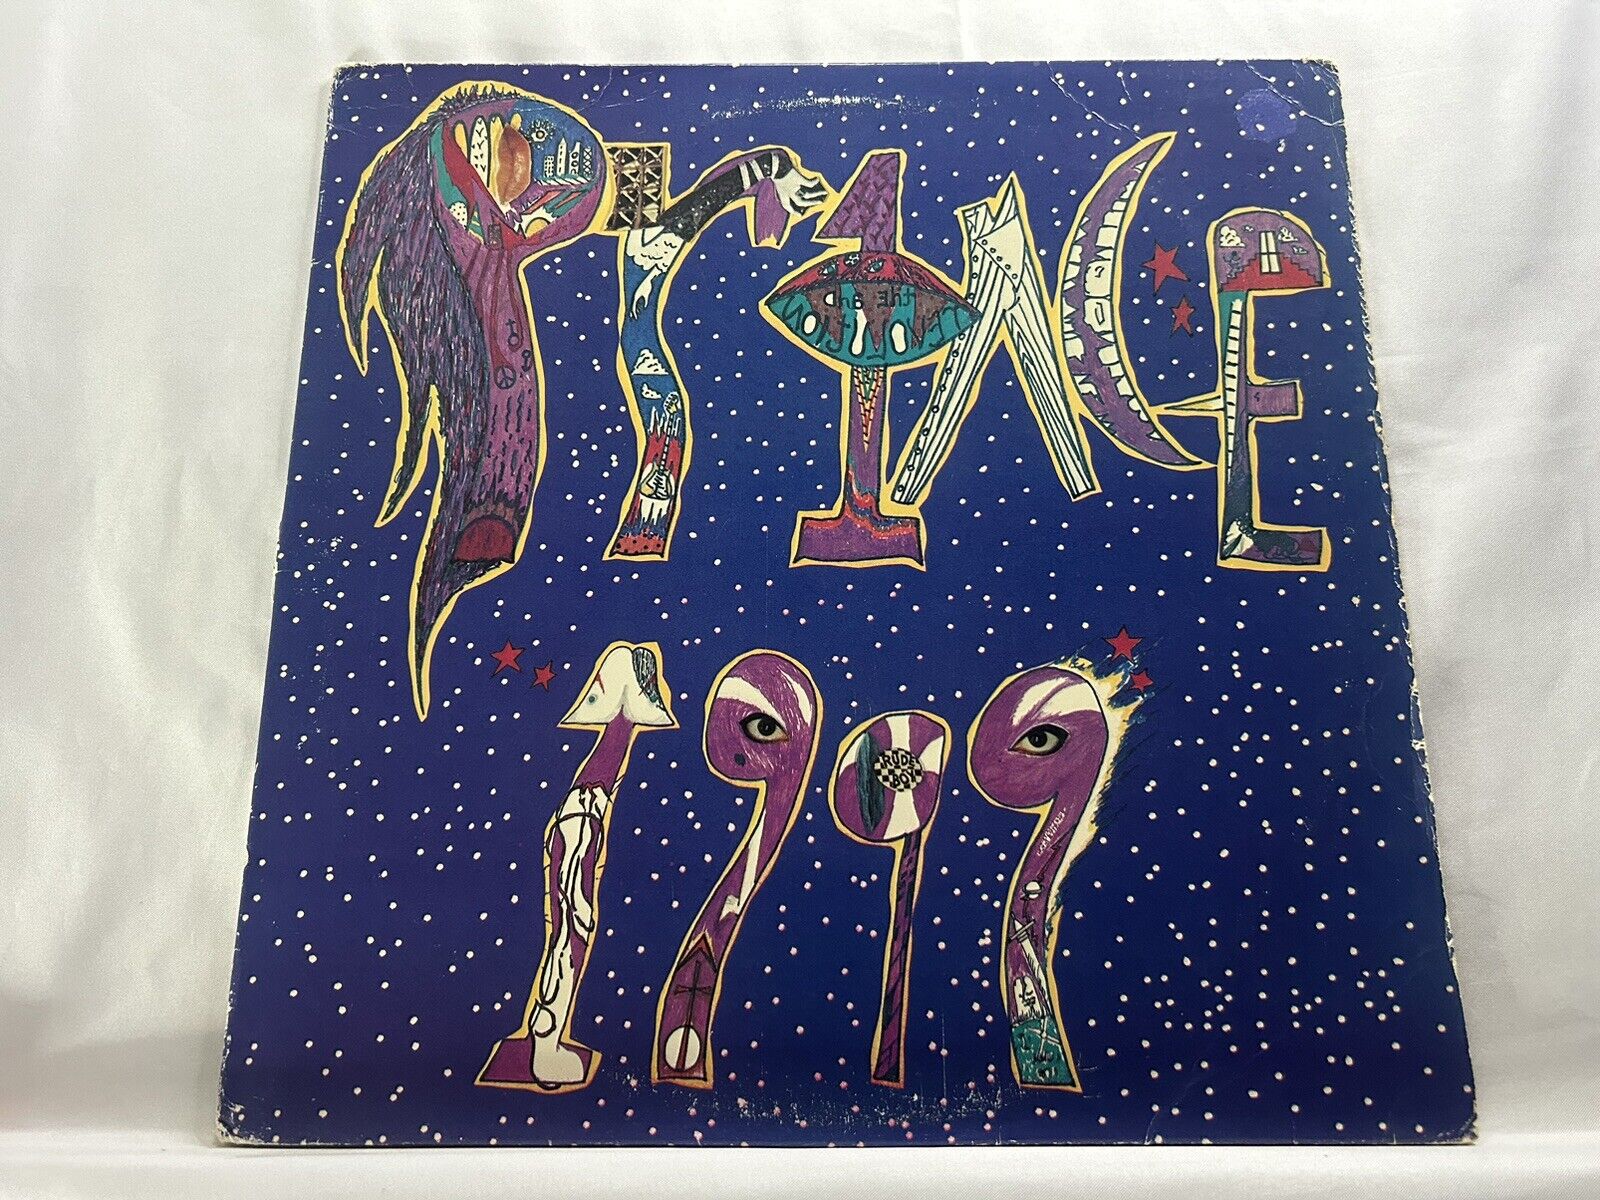 Prince and the Revolution 1999 Warner Bros 1 23720 Little Red Corvette Tested